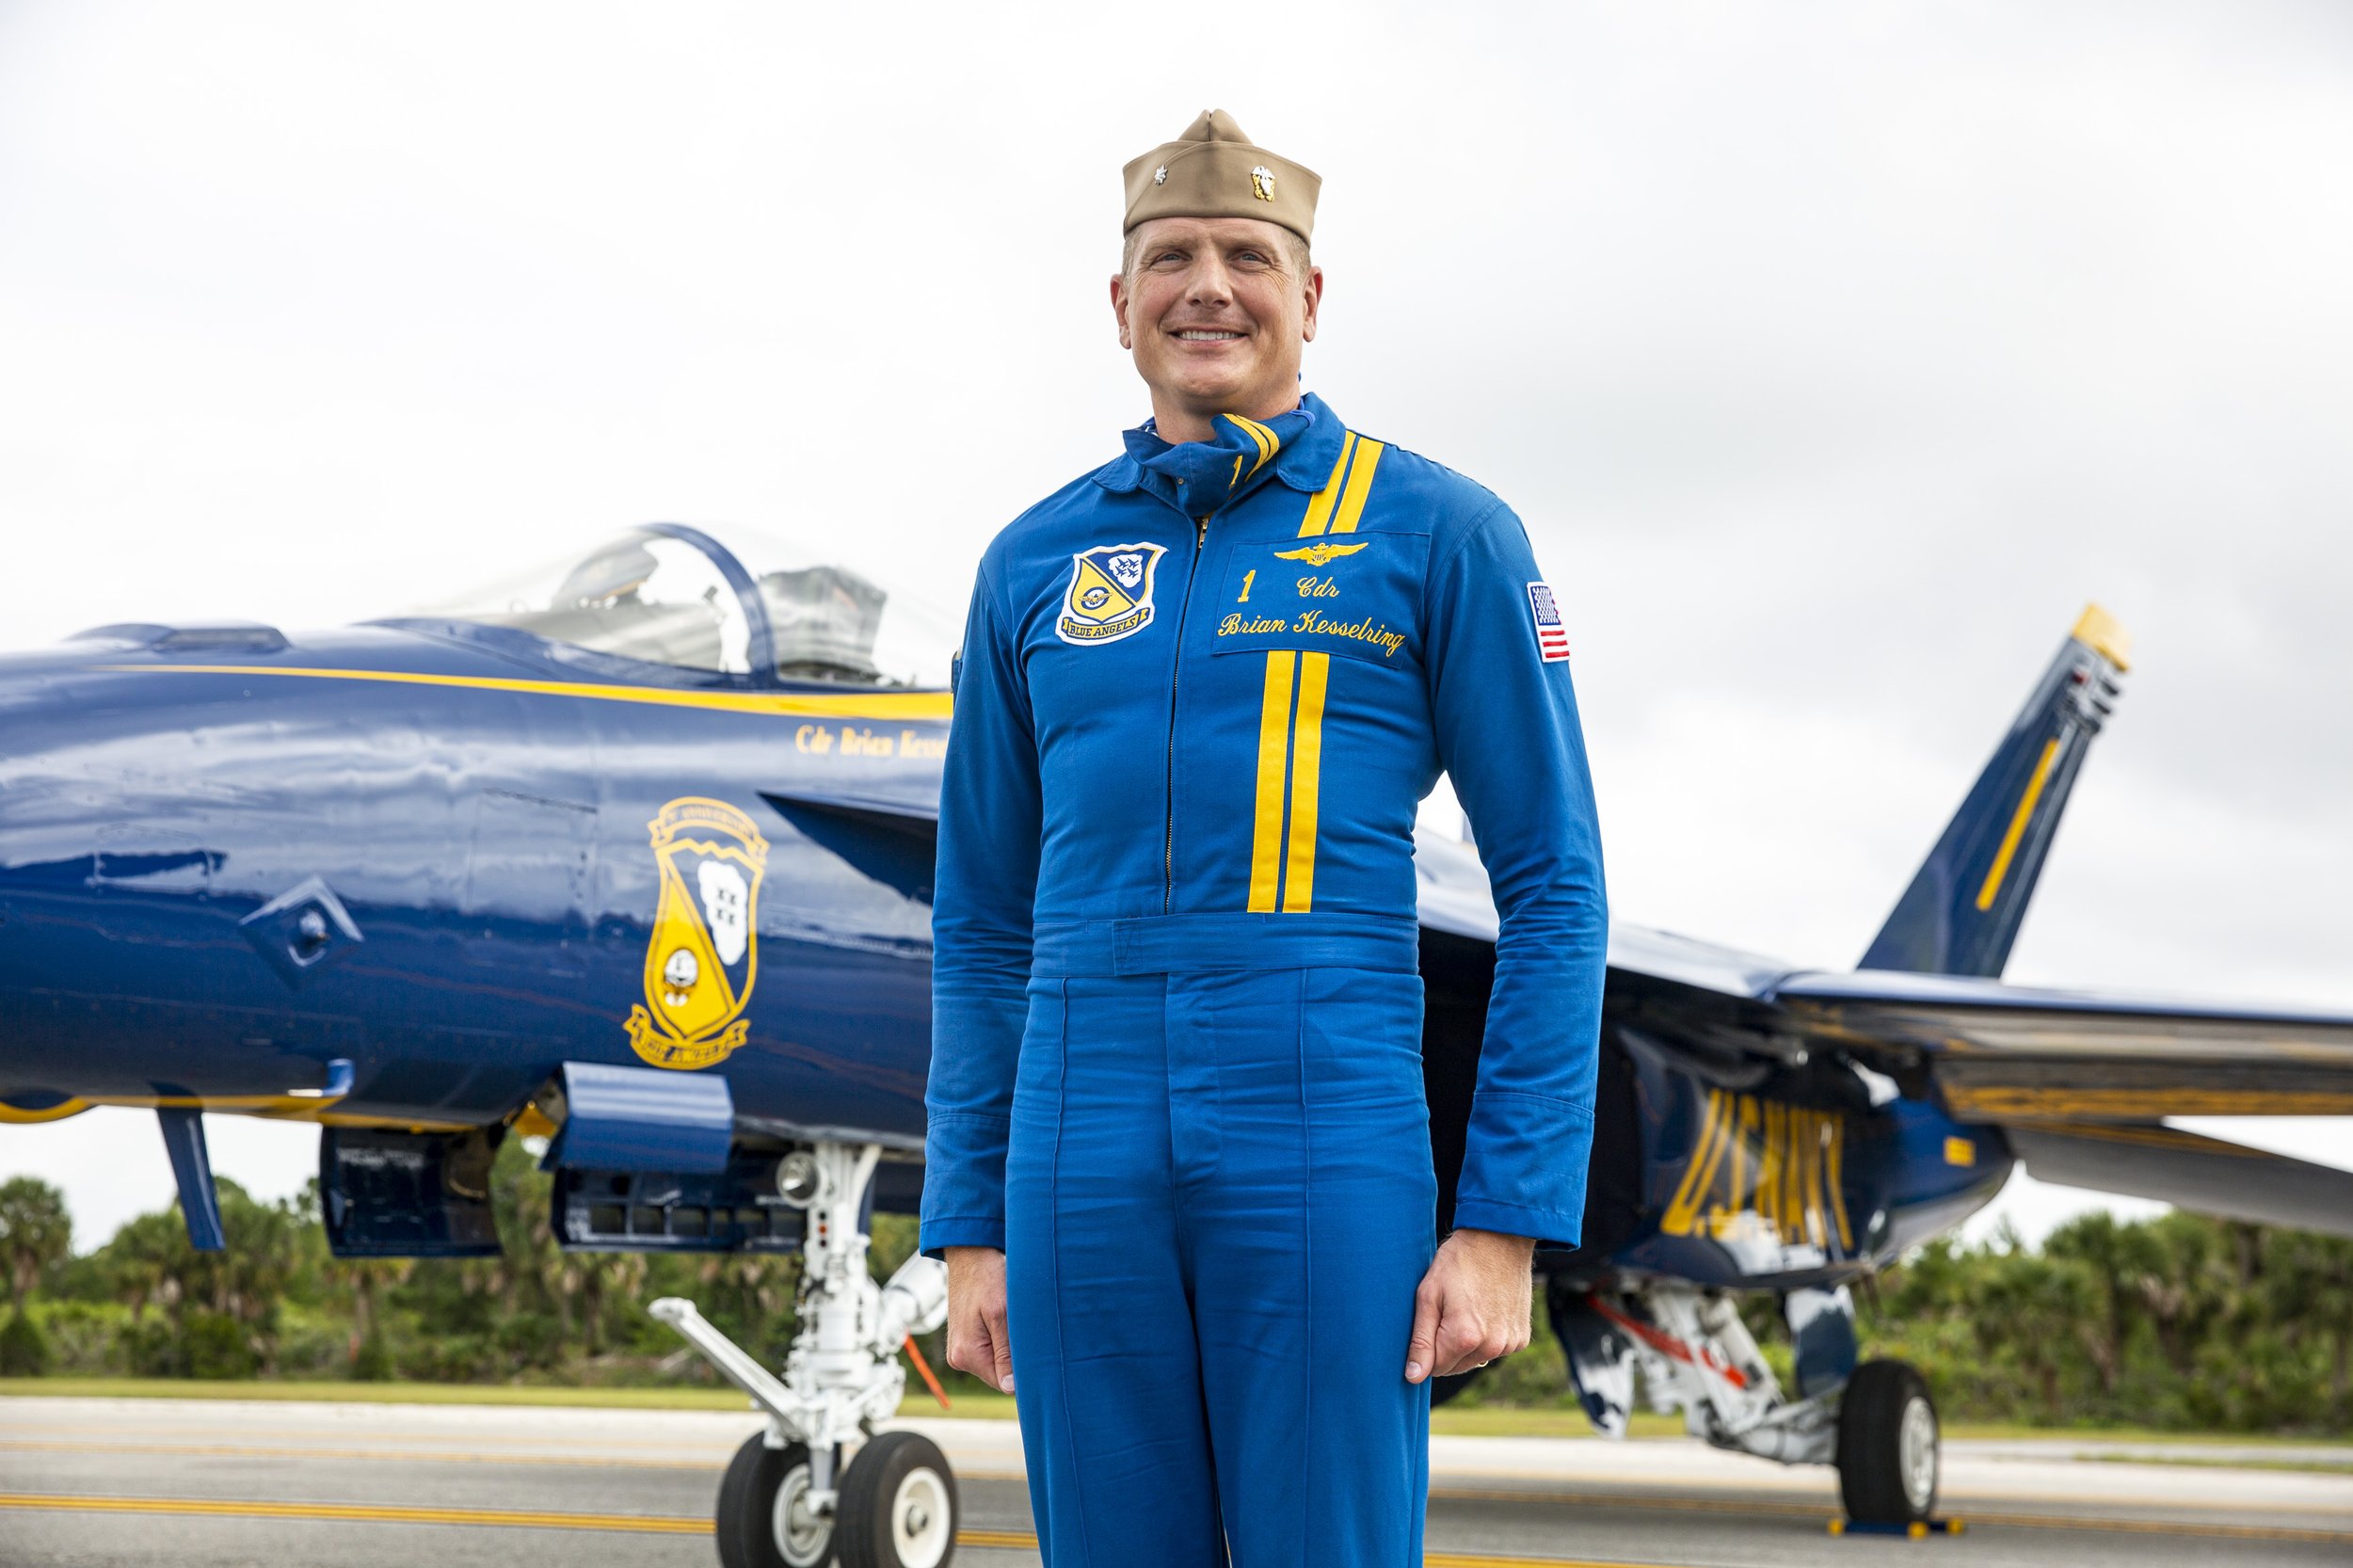  Cmdr. Brian Kesselring, flight leader and commanding officer of the U.S. Navy Blue Angels demonstration squadron, arrives at the Orlando Melbourne International Airport before The Great Florida Air Show. 